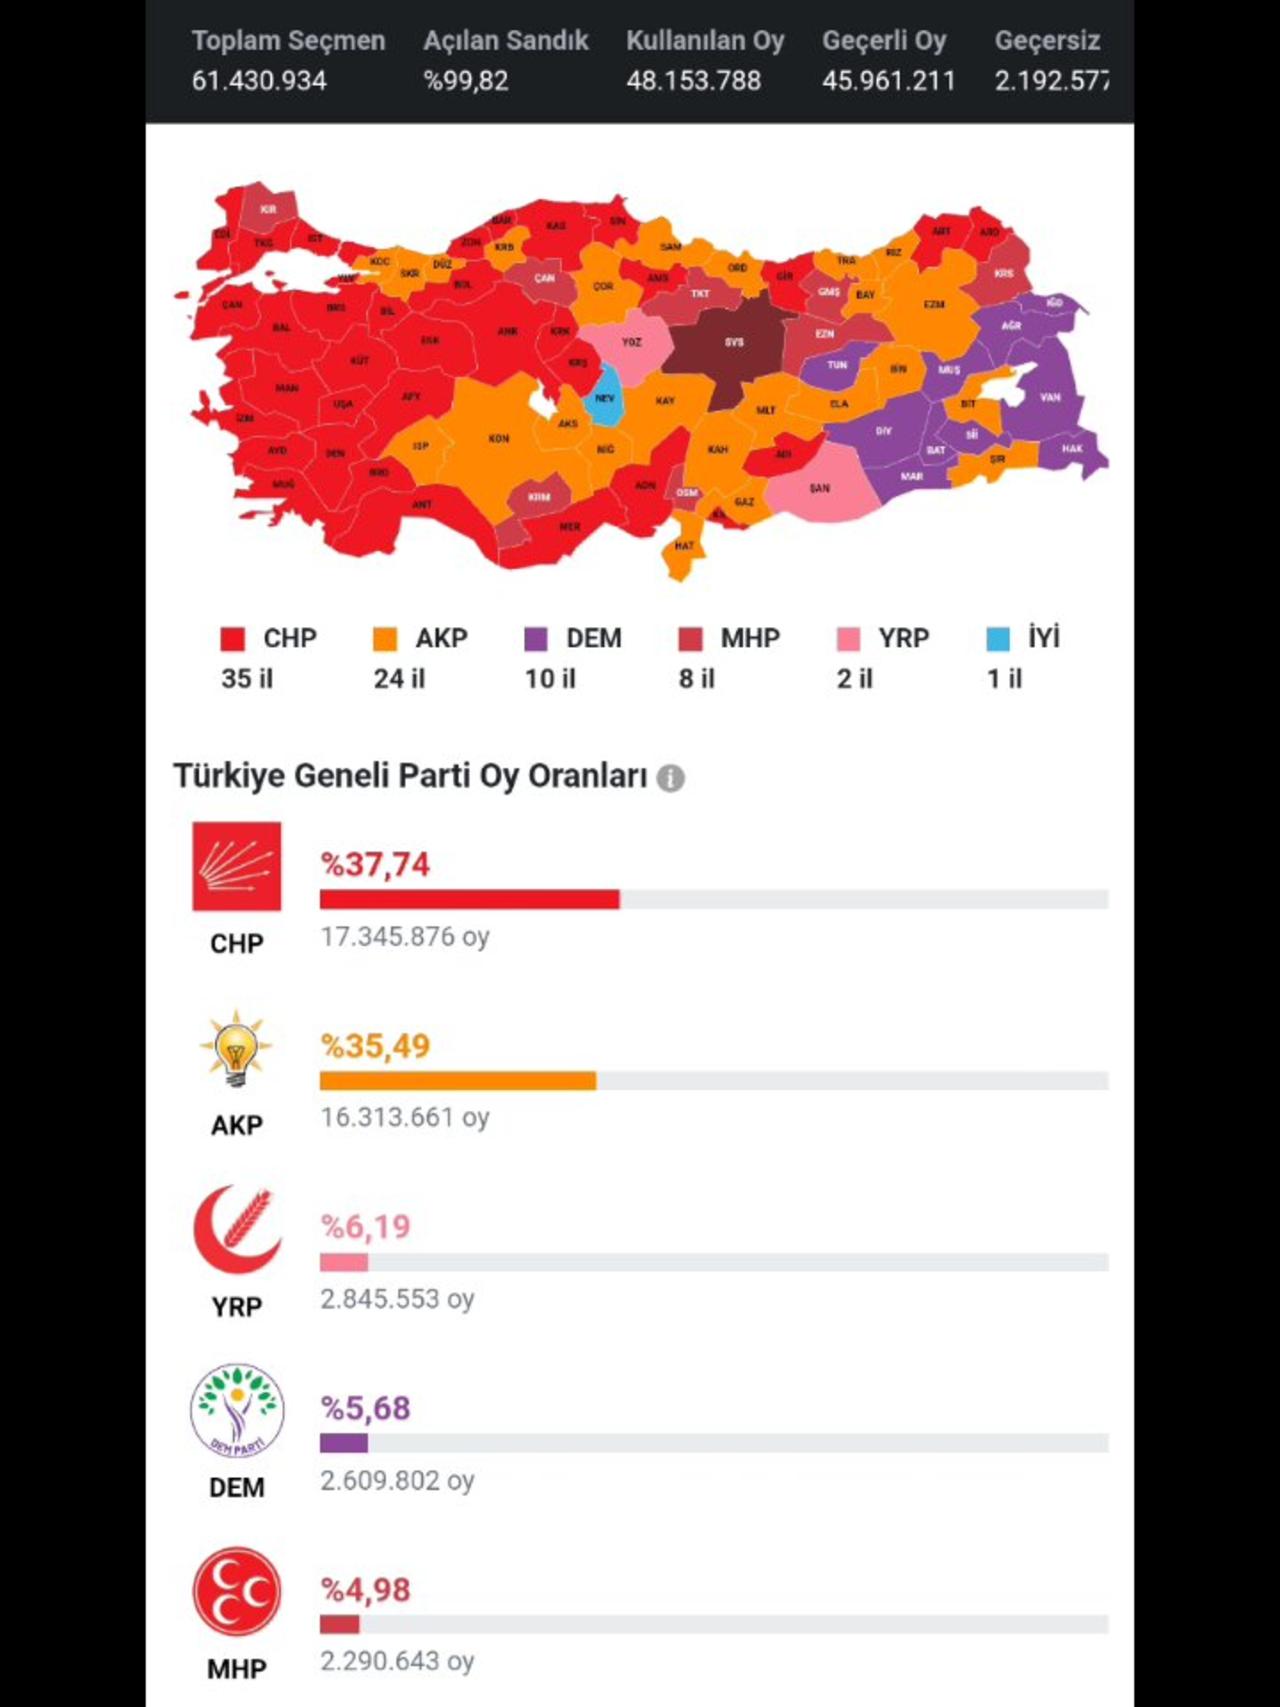 a critical juncture for the world: Local elections were held in Turkey. Read the description below.